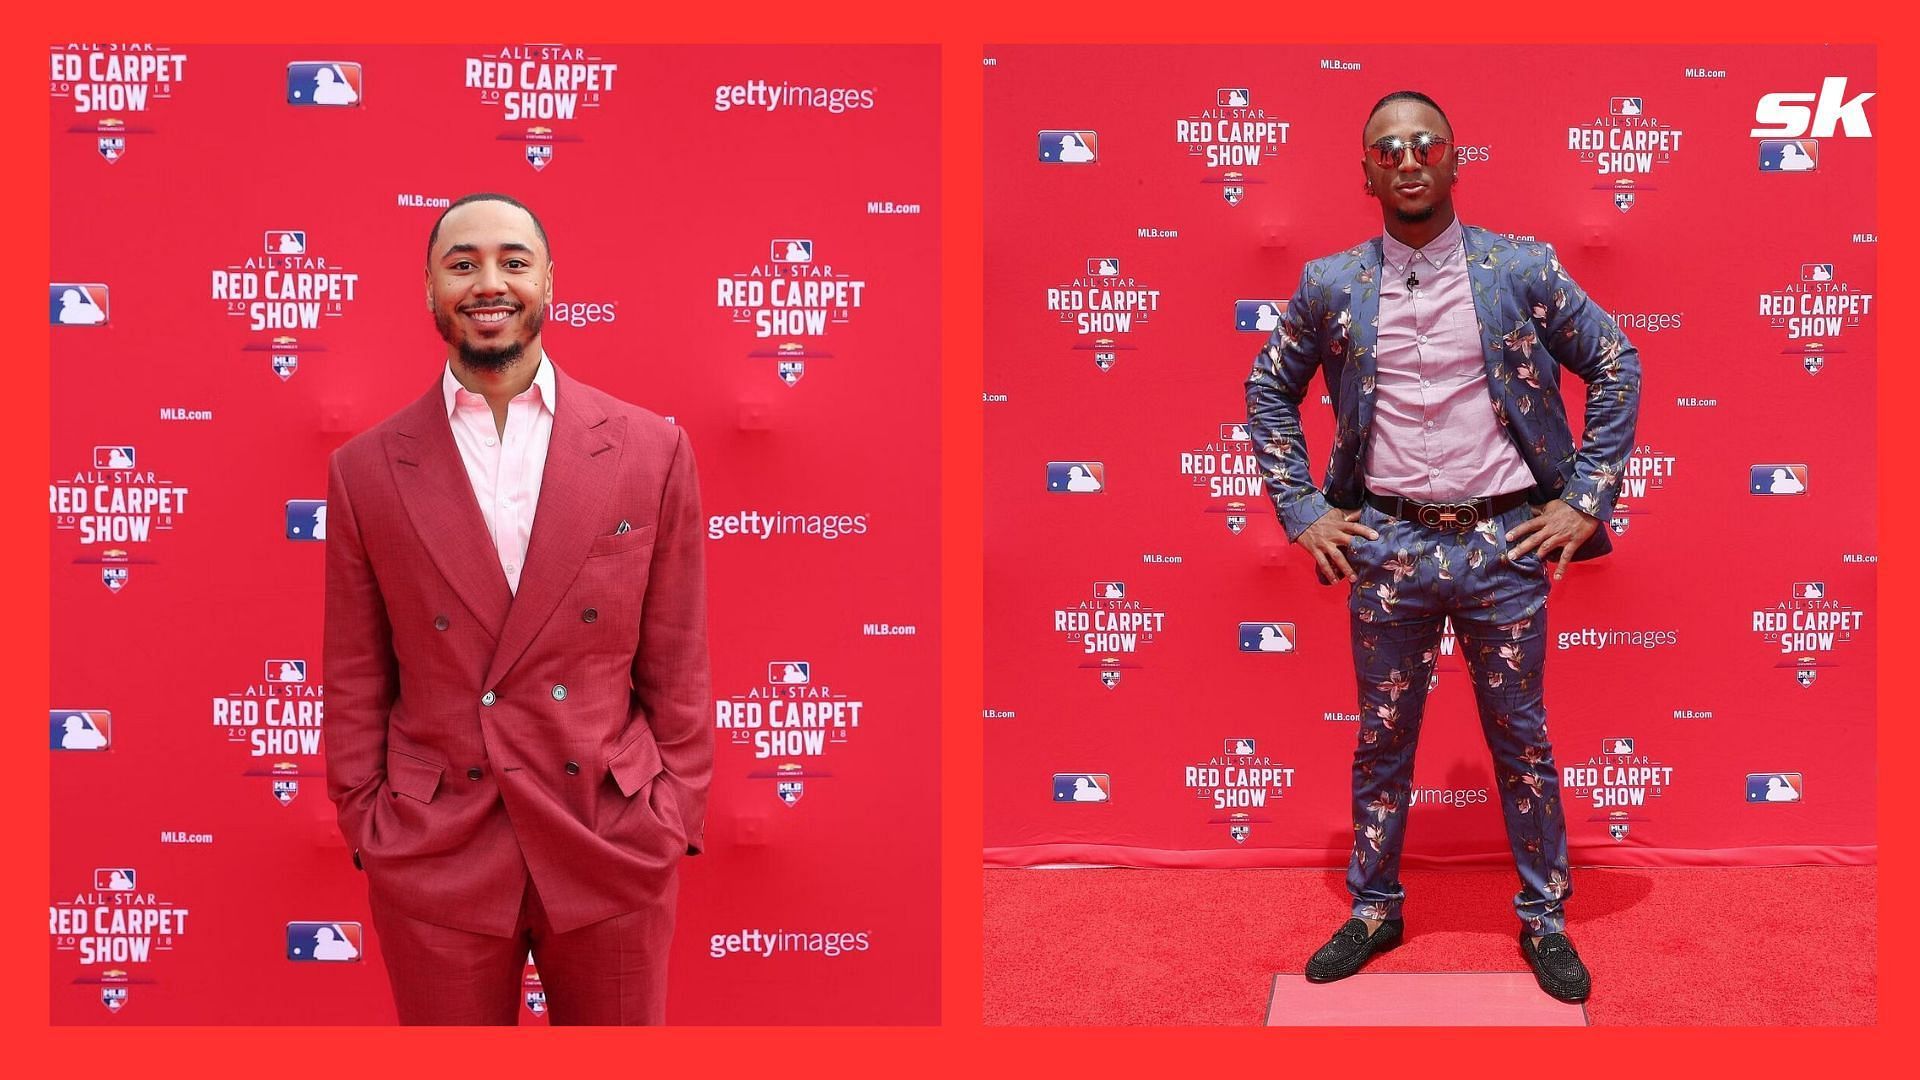 How to watch MLB All-Star Red Carpet Show 2023 Start Time, TV and streaming details